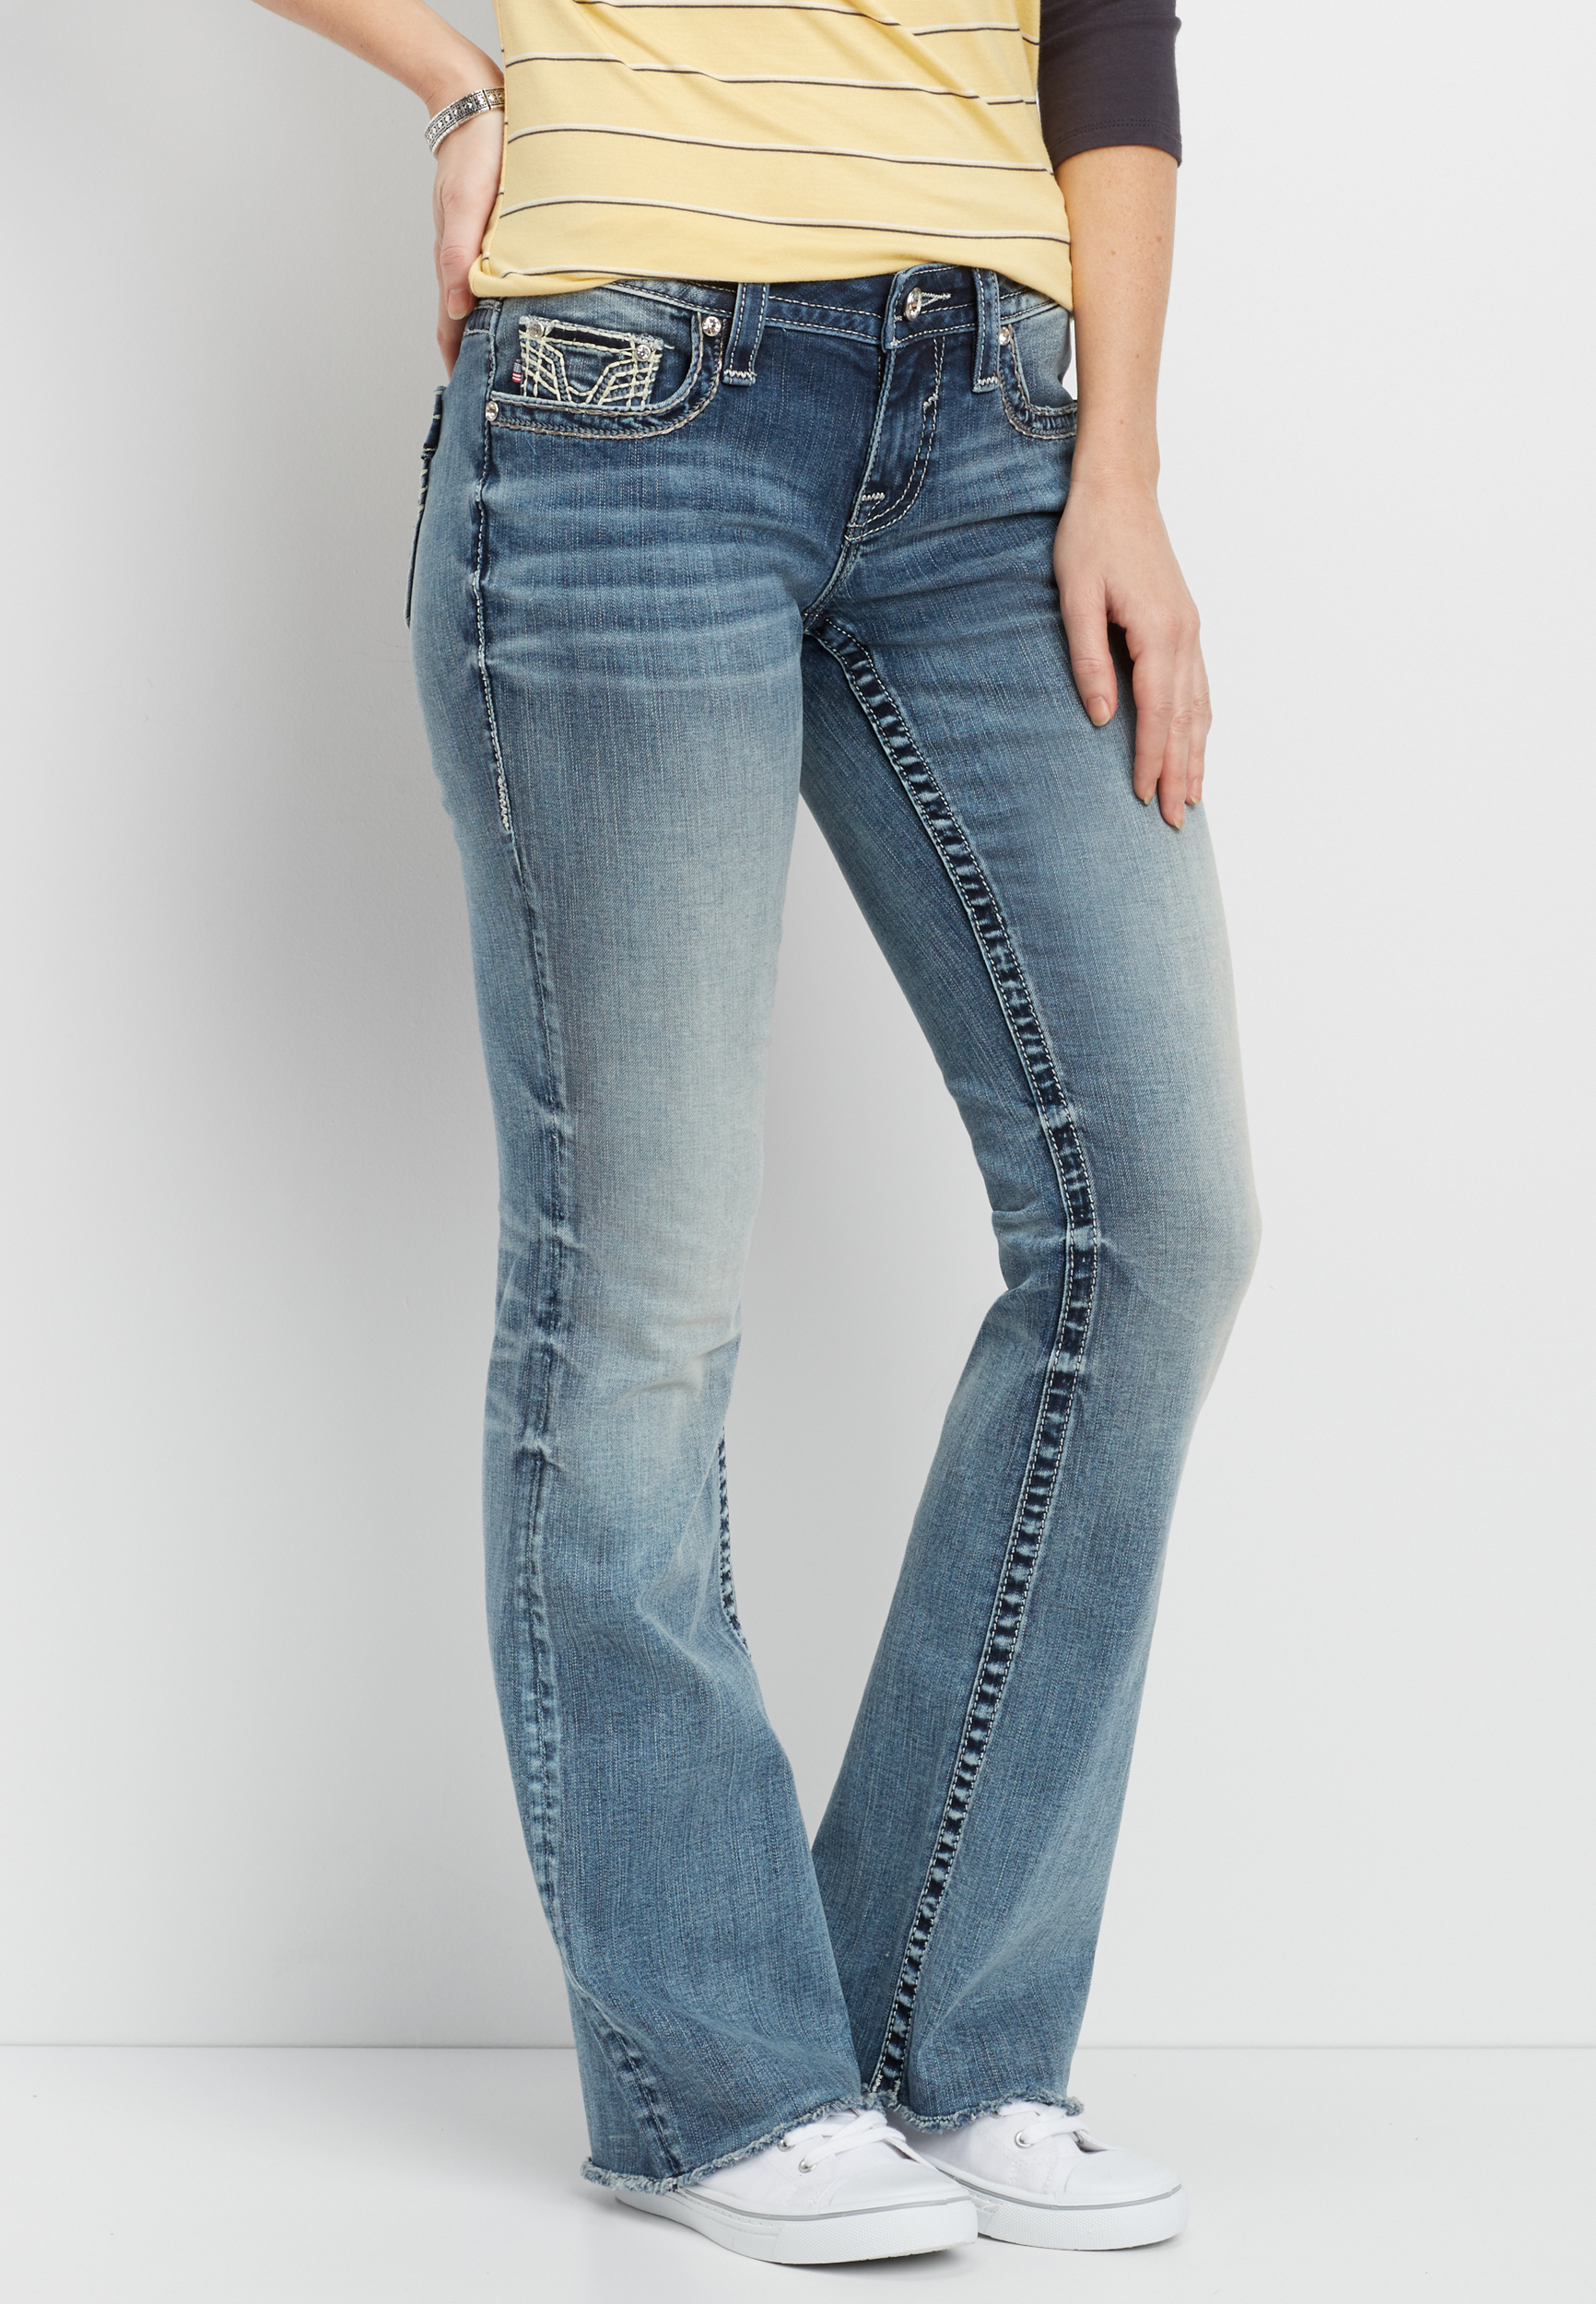 frayed bootcut jeans